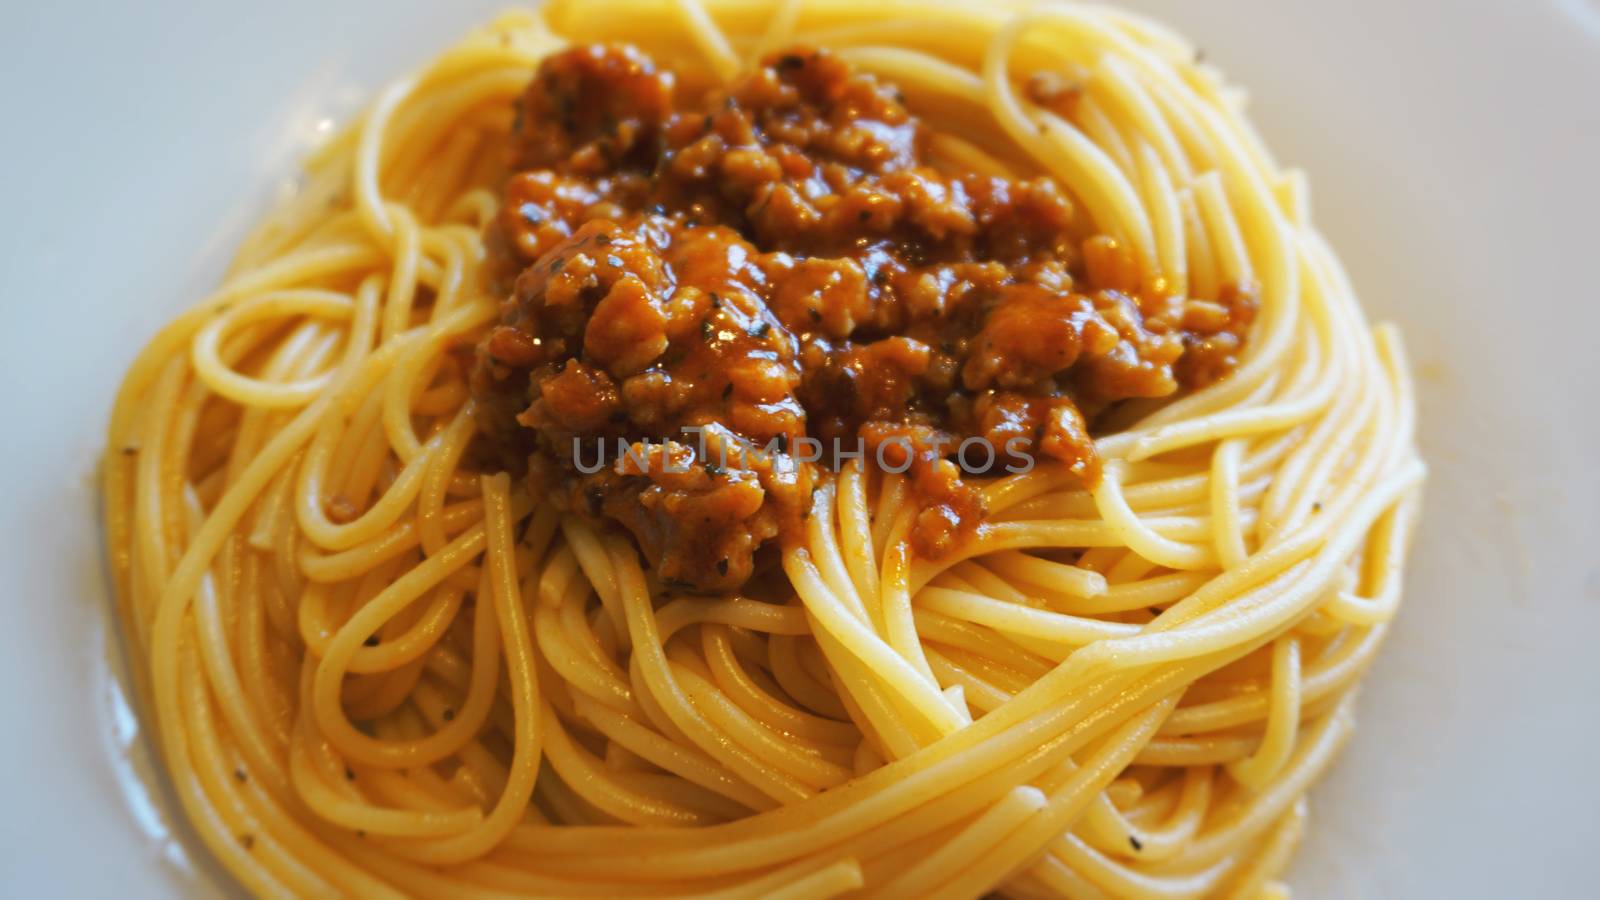 Plate of delicious spaghetti Bolognaise or Bolognese with sauce by natali_brill